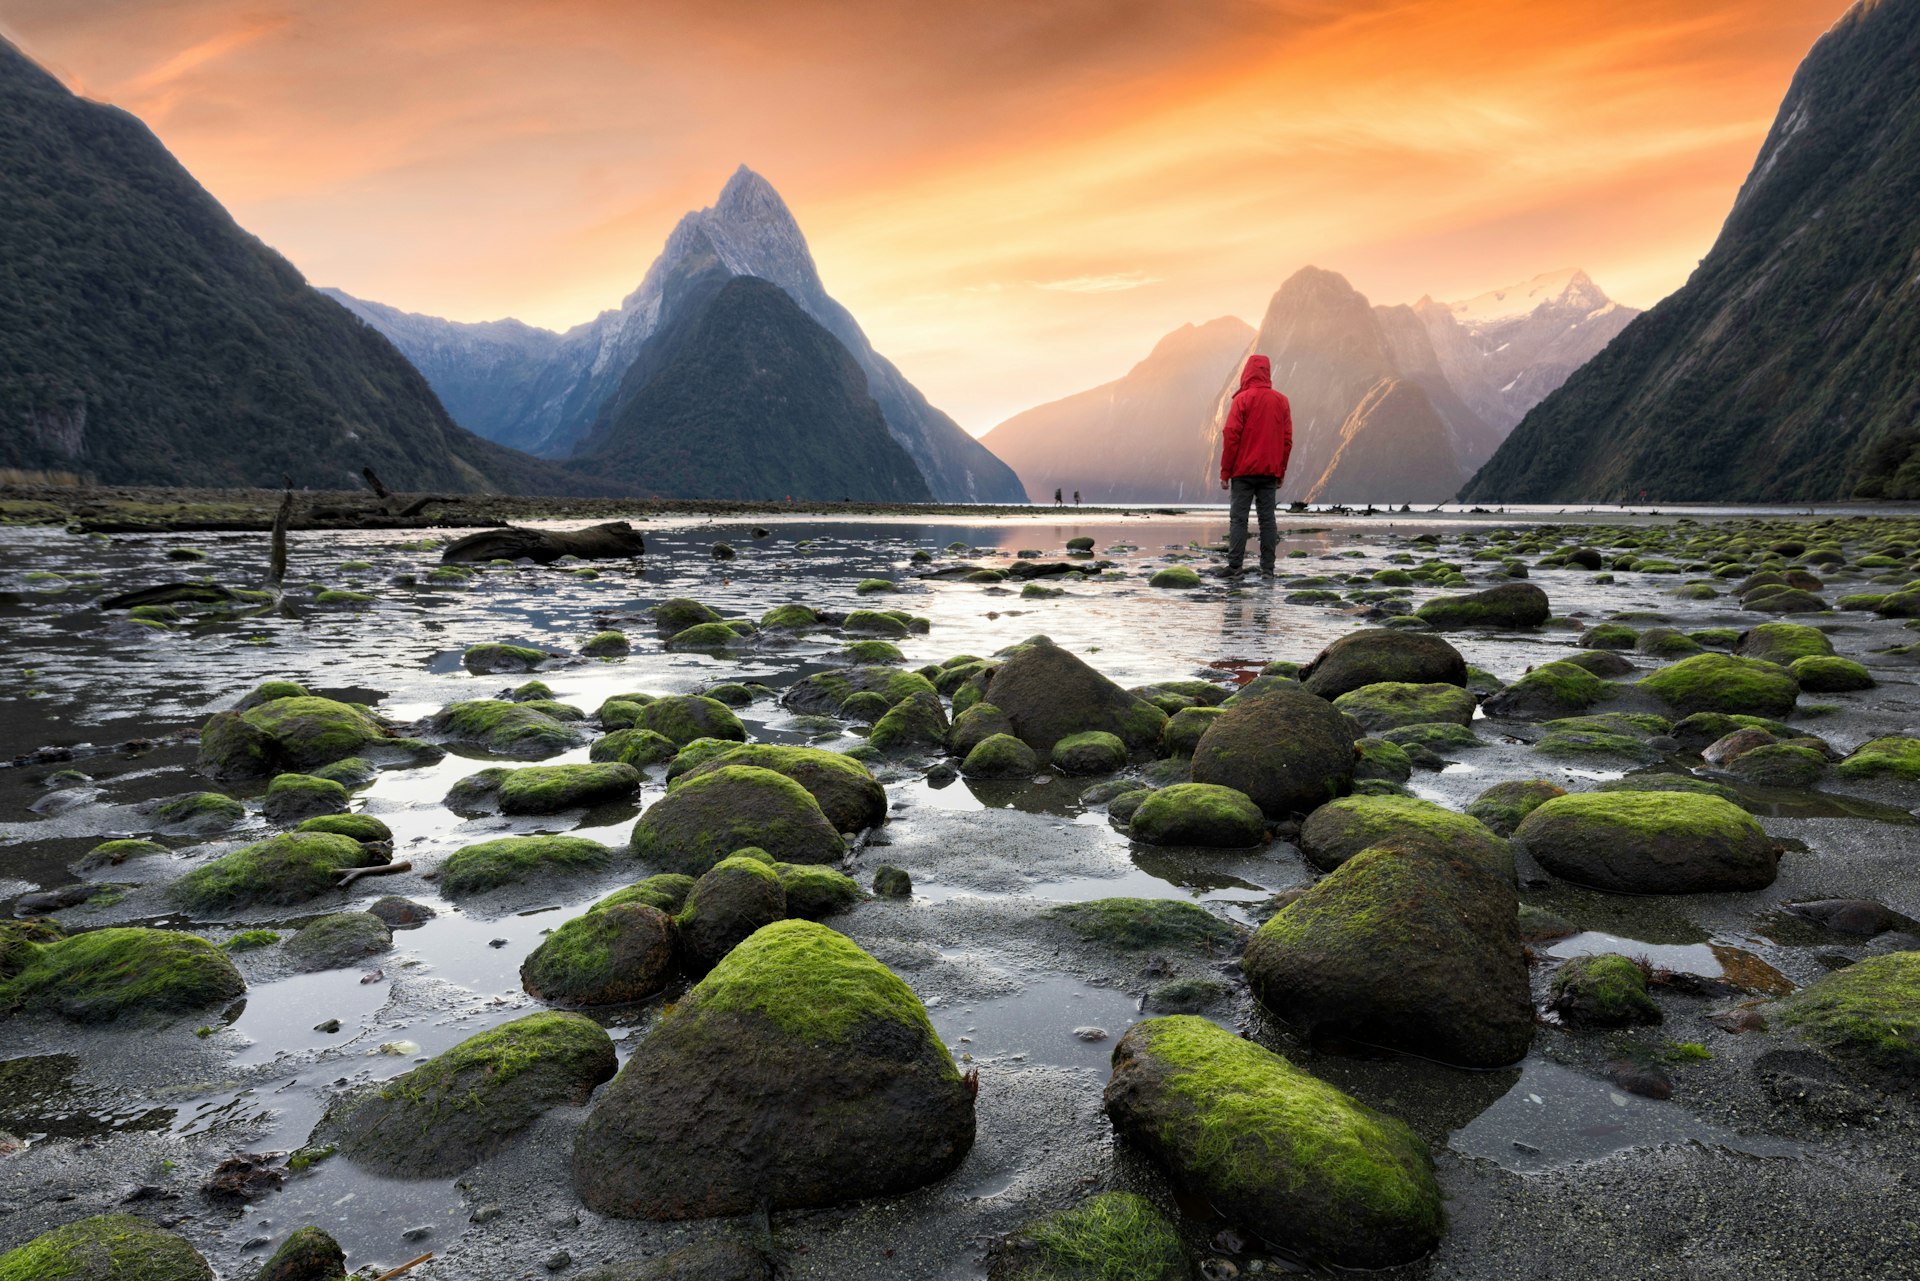 The Milford Sound in New Zealand's South Island